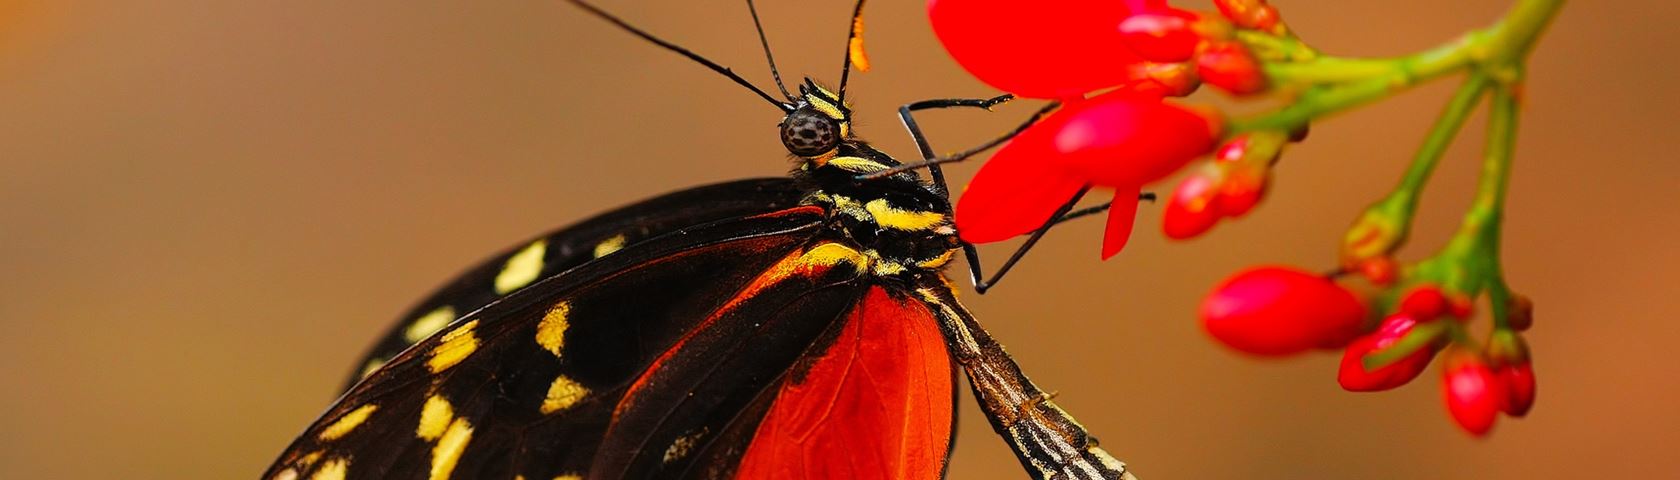 Red Butterfly - Insect - HD Wallpaper 